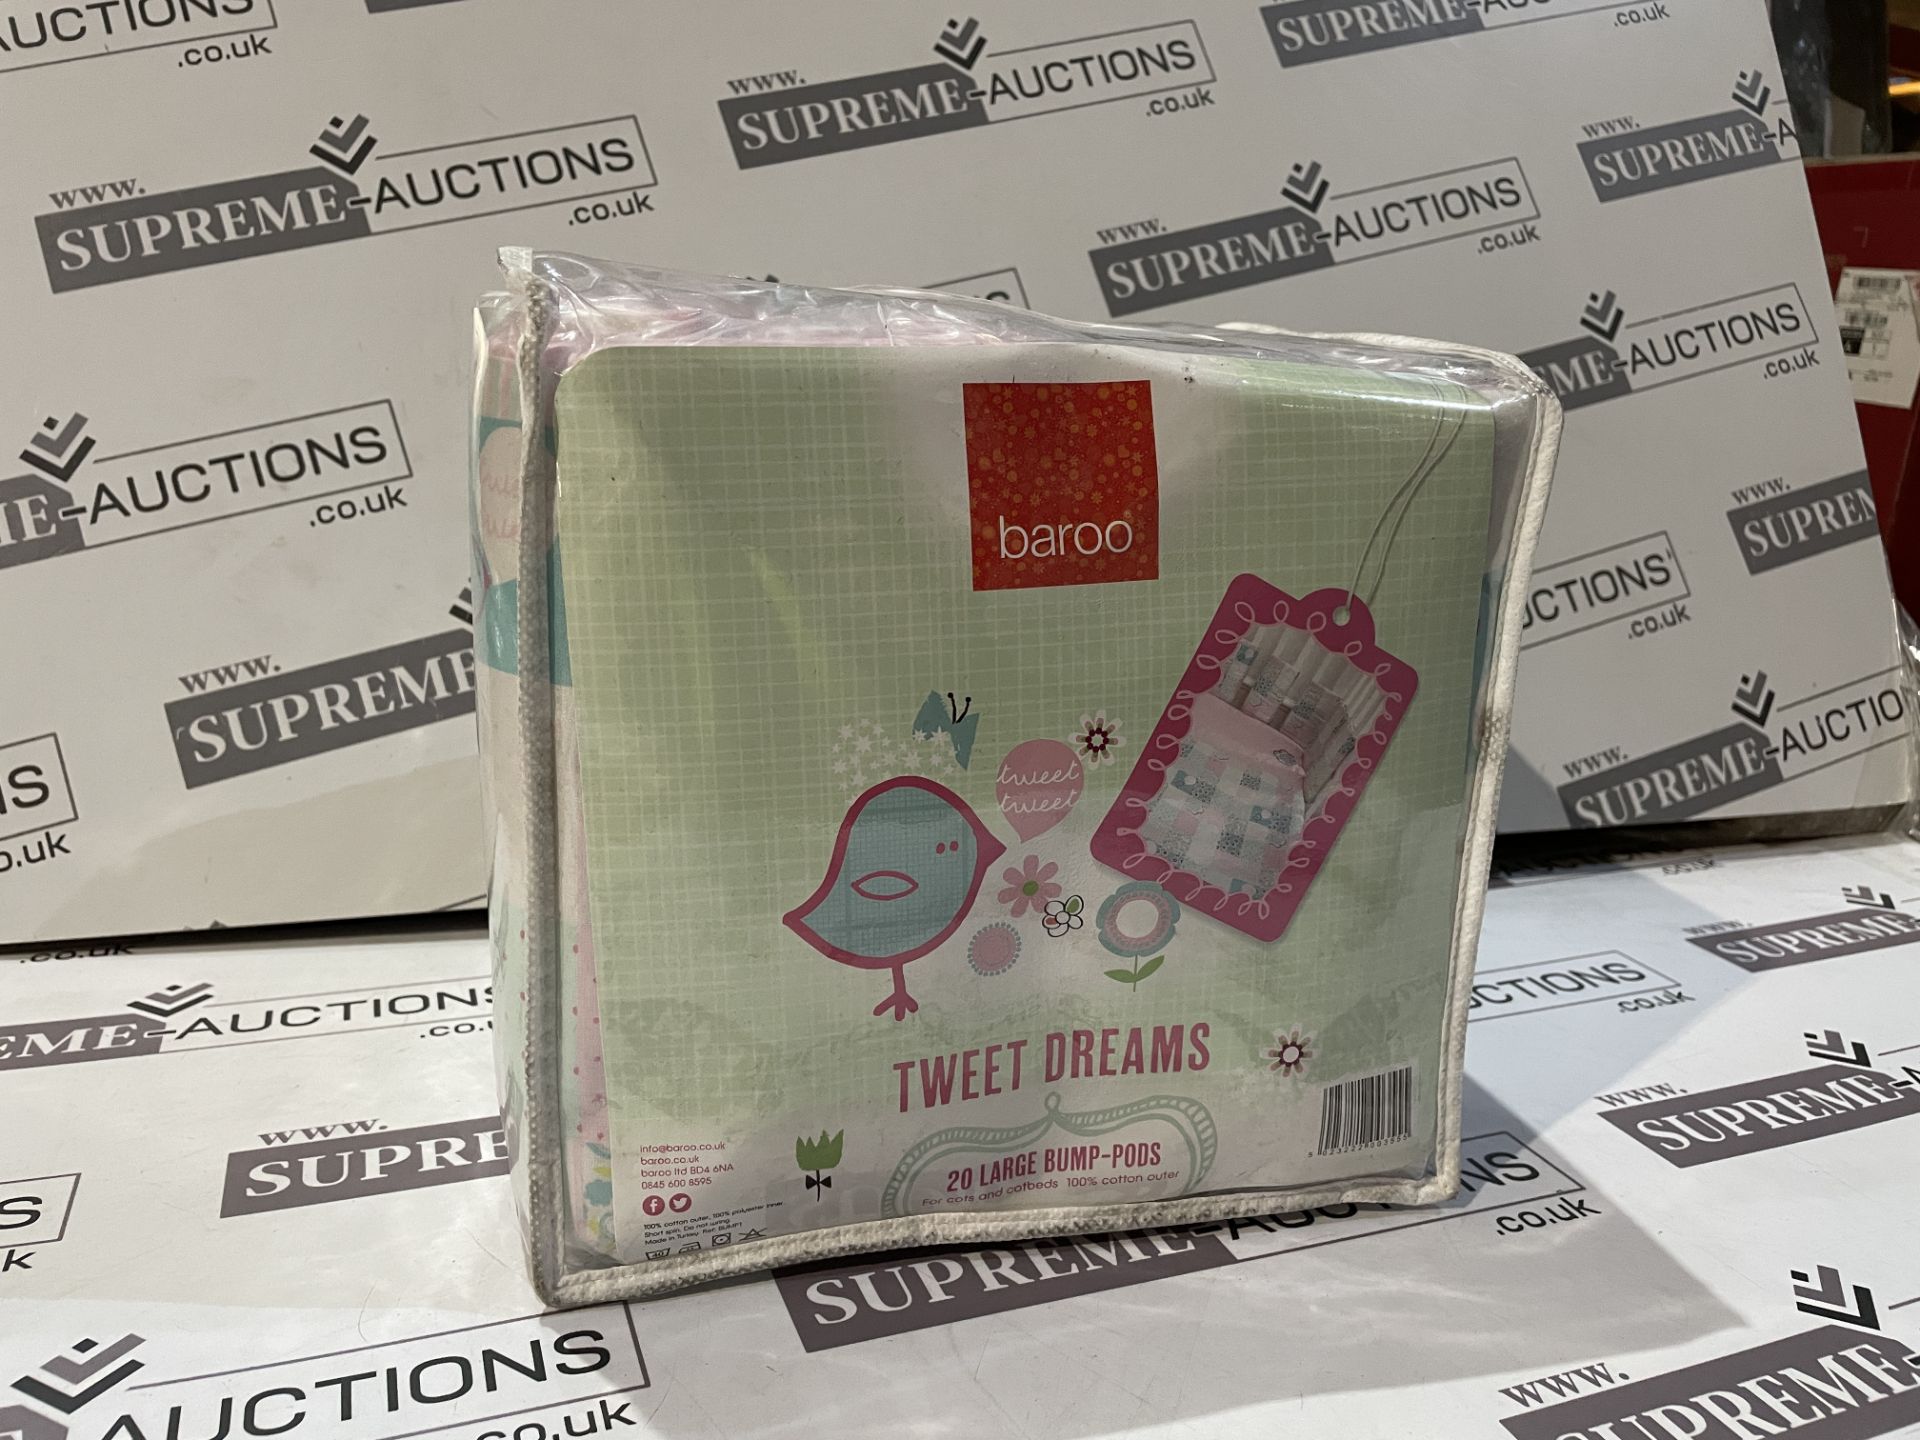 10 X BRAND NEW BAROO TWEET DREAMS SETS OF 20 LARGE BUMP PODS RRP £20 EACH R19